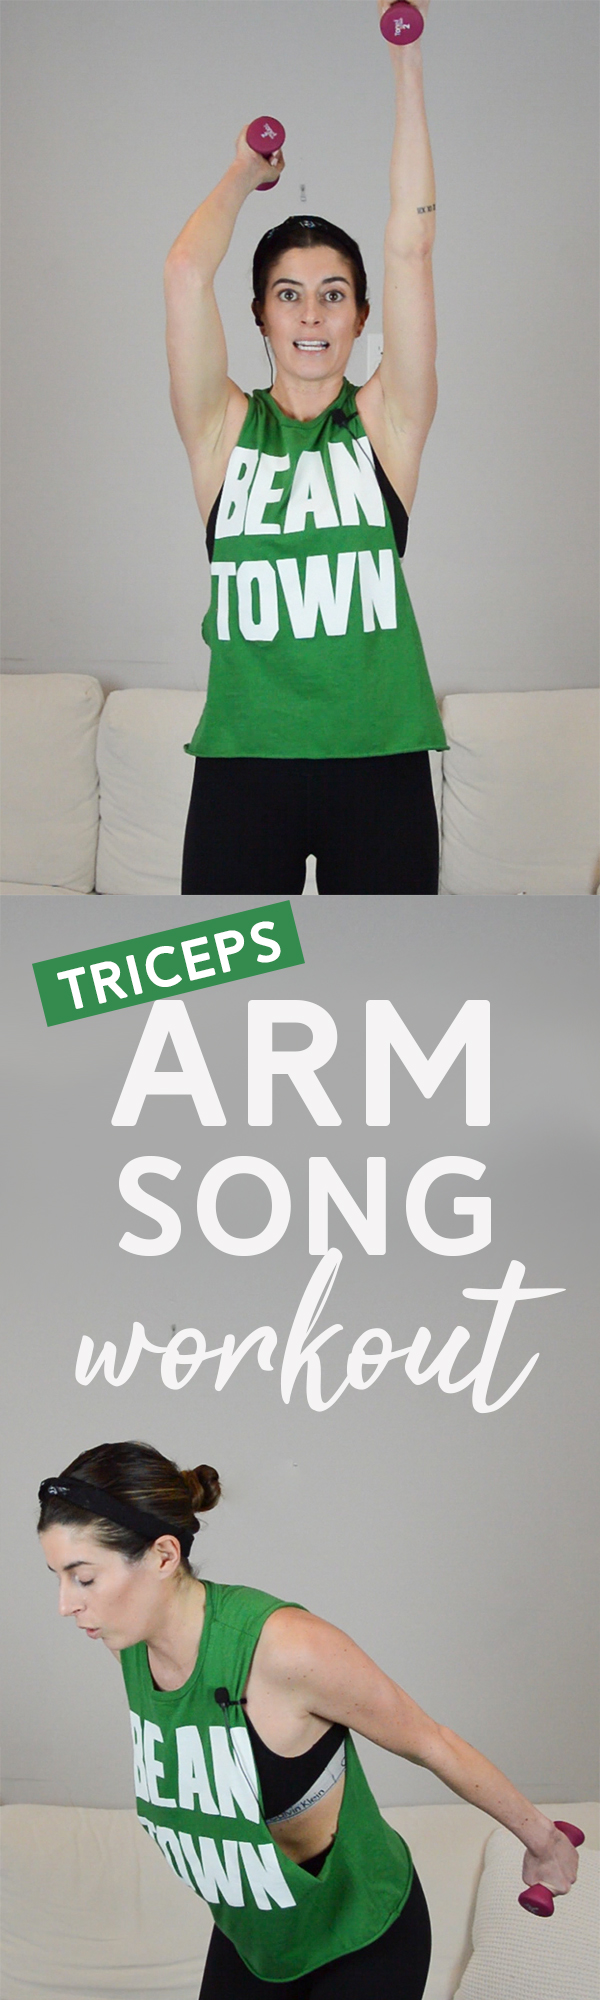 Triceps Workout: Light Weights, High Reps to the Music - work your triceps to the beat of the music! #triceps #tricepsworkout #armworkout #armsong